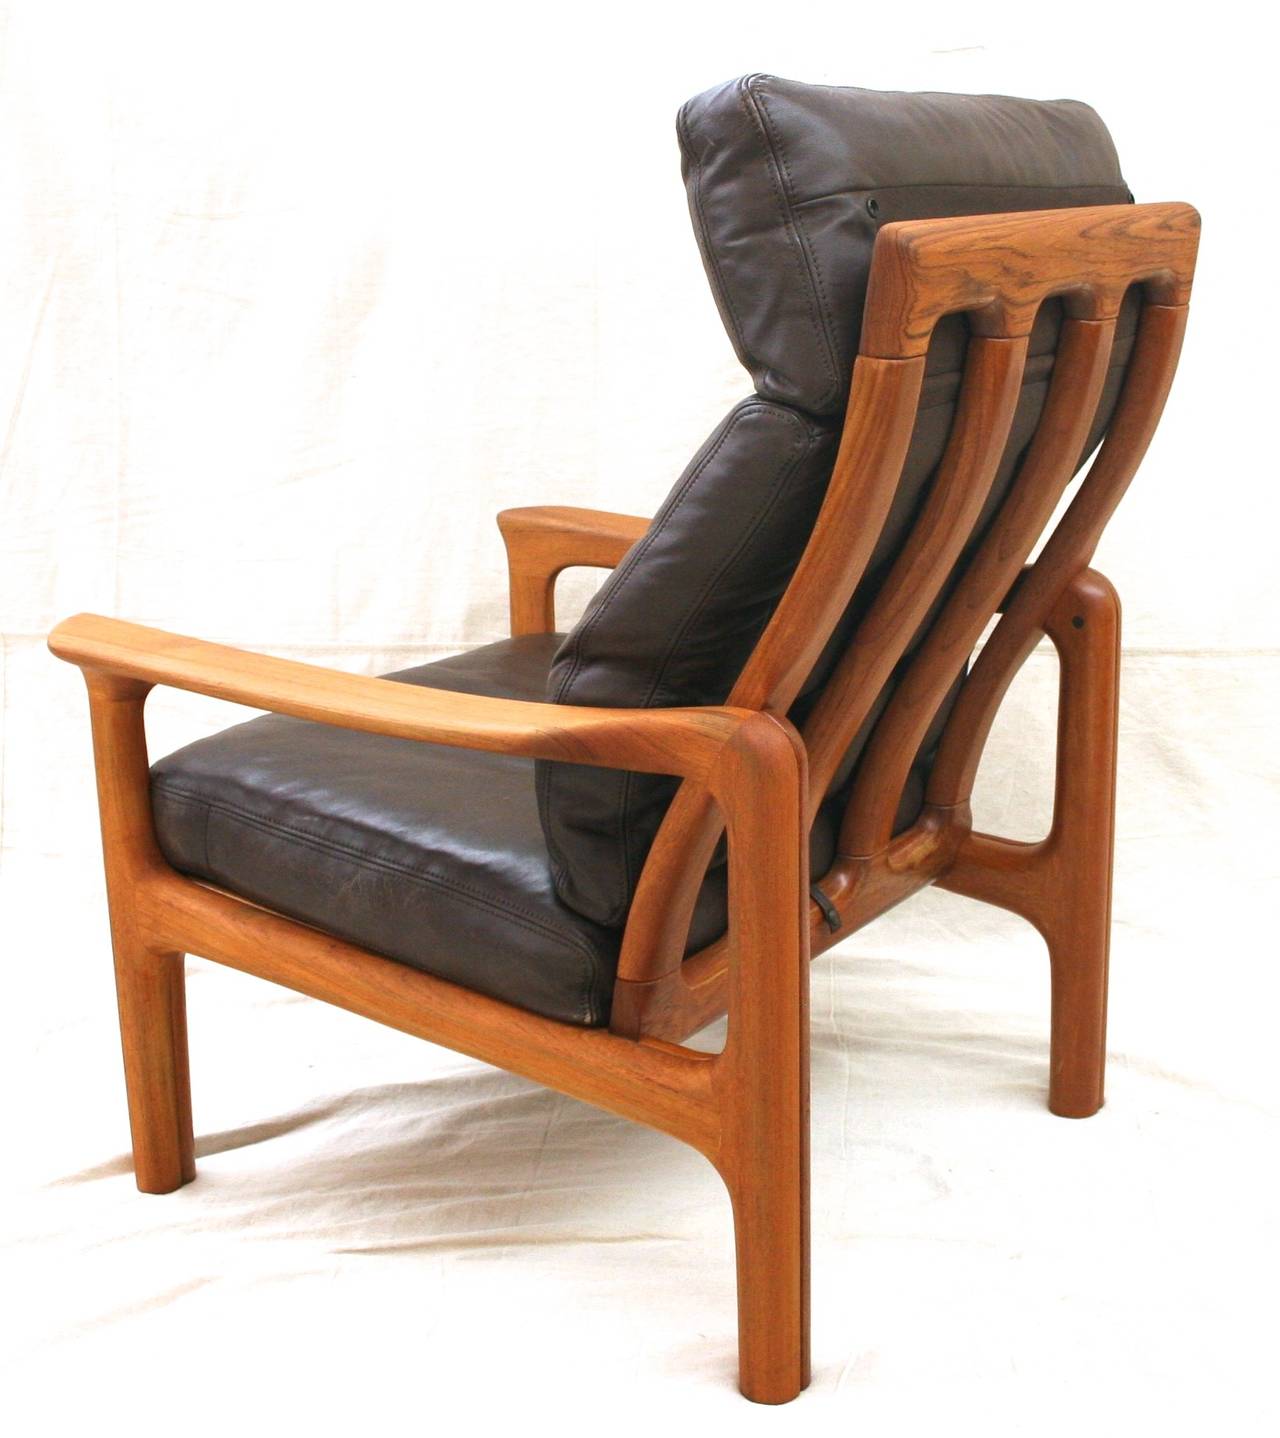 20th Century Pair of Teak and Leather Danish Modern High Back Lounge Chairs, circa 1970 For Sale